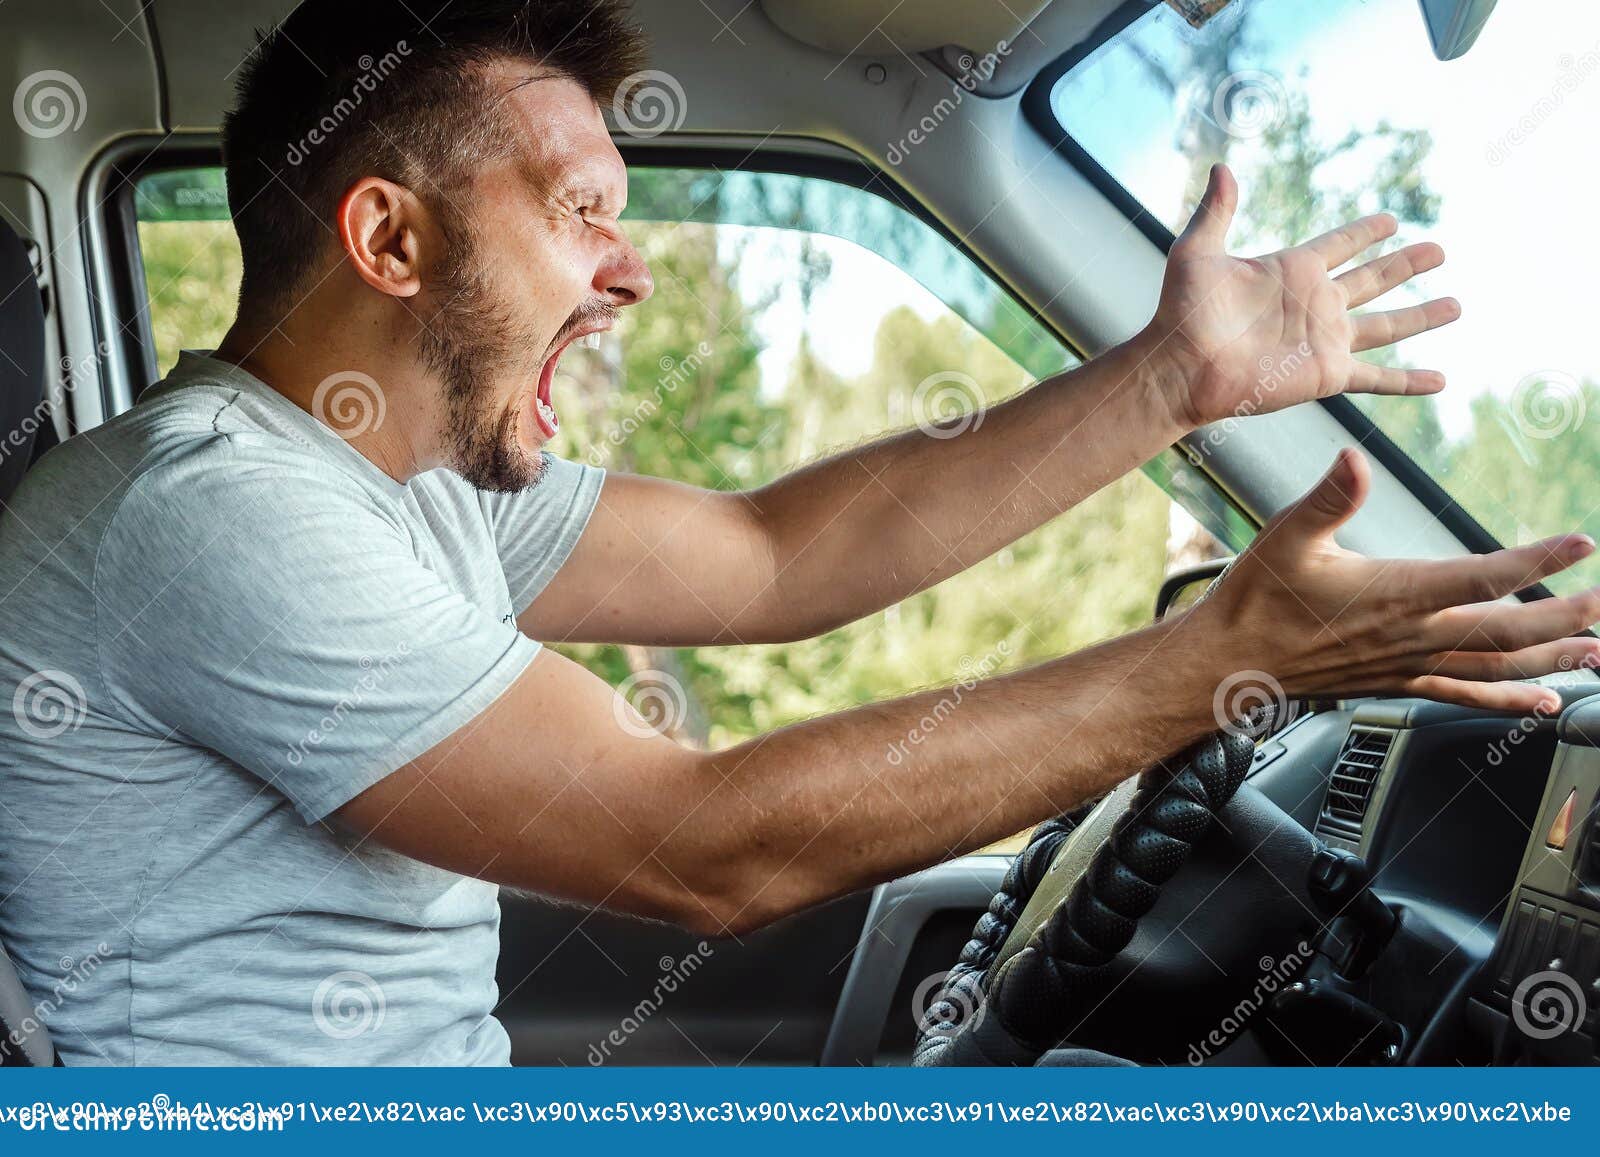 aggressive man, the driver of the car is outraged at the wheel during the trip. emergency, accident, violation of rights, dispute